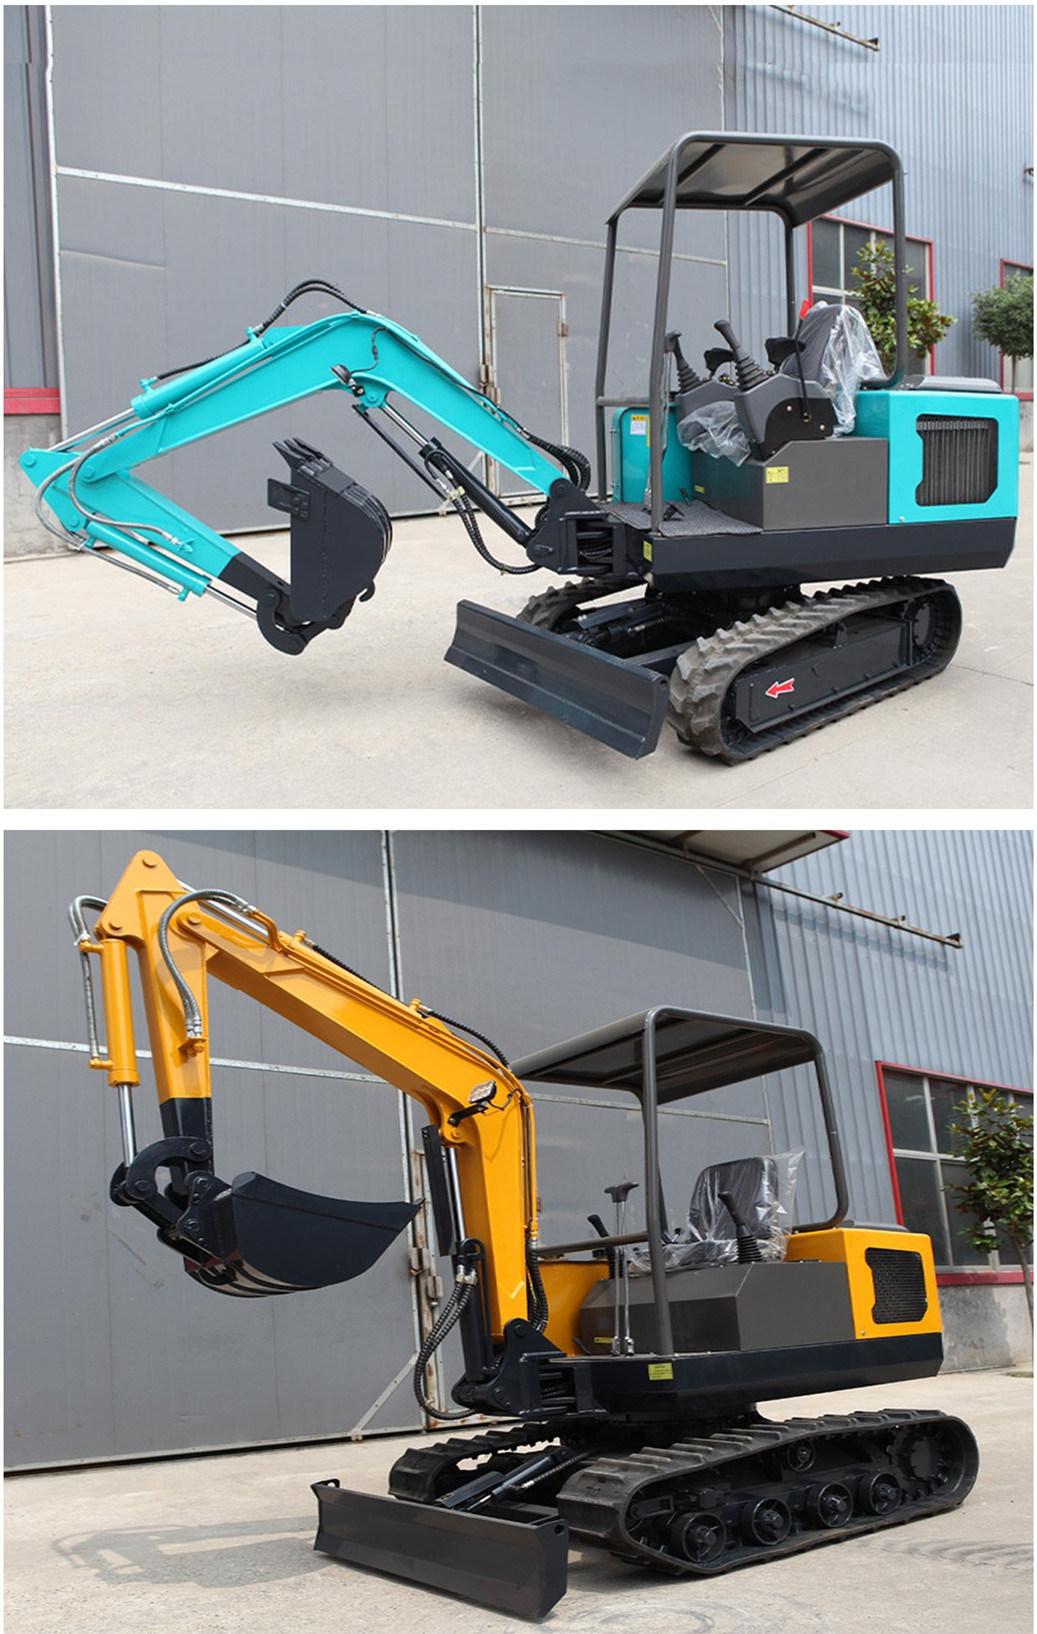 Cheap Price Agriculture Construction Machinery Small Compact Excavator Mini